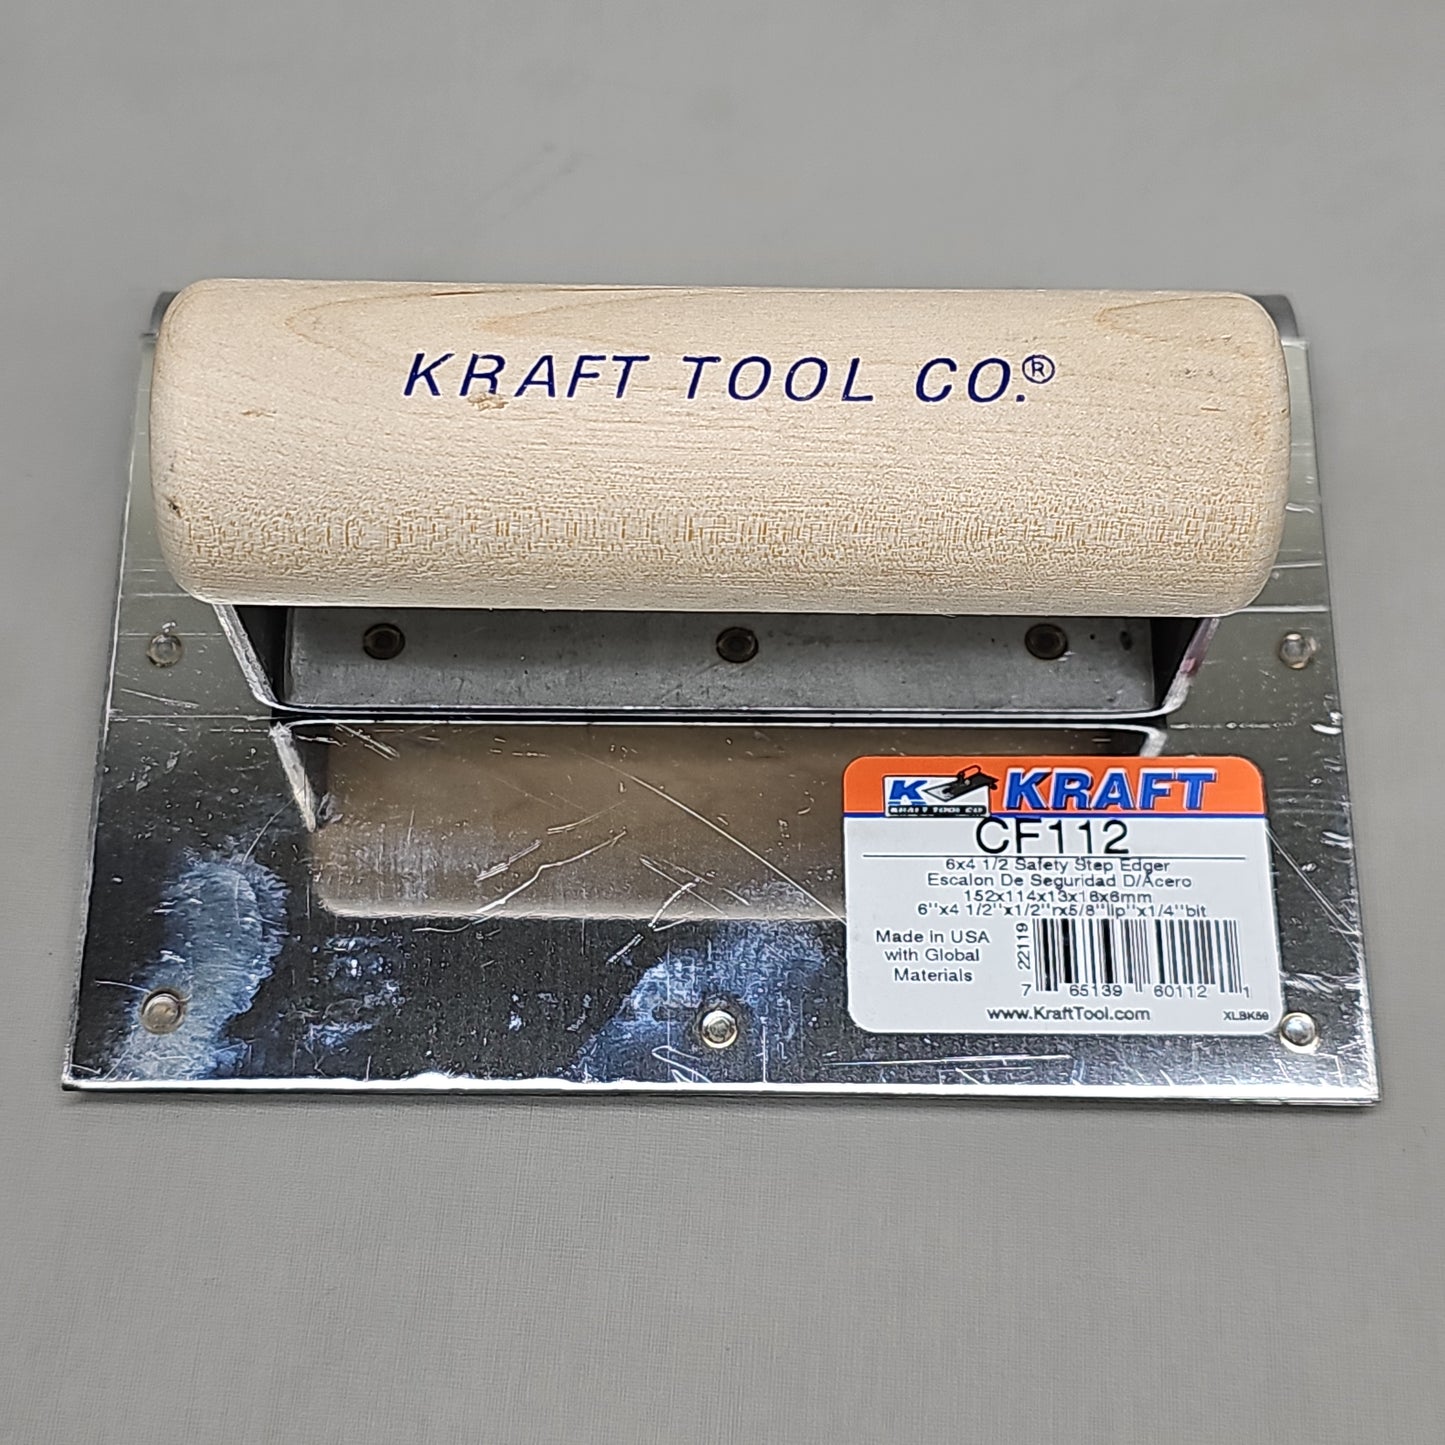 KRAFT TOOL CO Safety Step Edger/Groover with Wood Handle 6" x 4-1/2" 1/2"R CF112 (New)